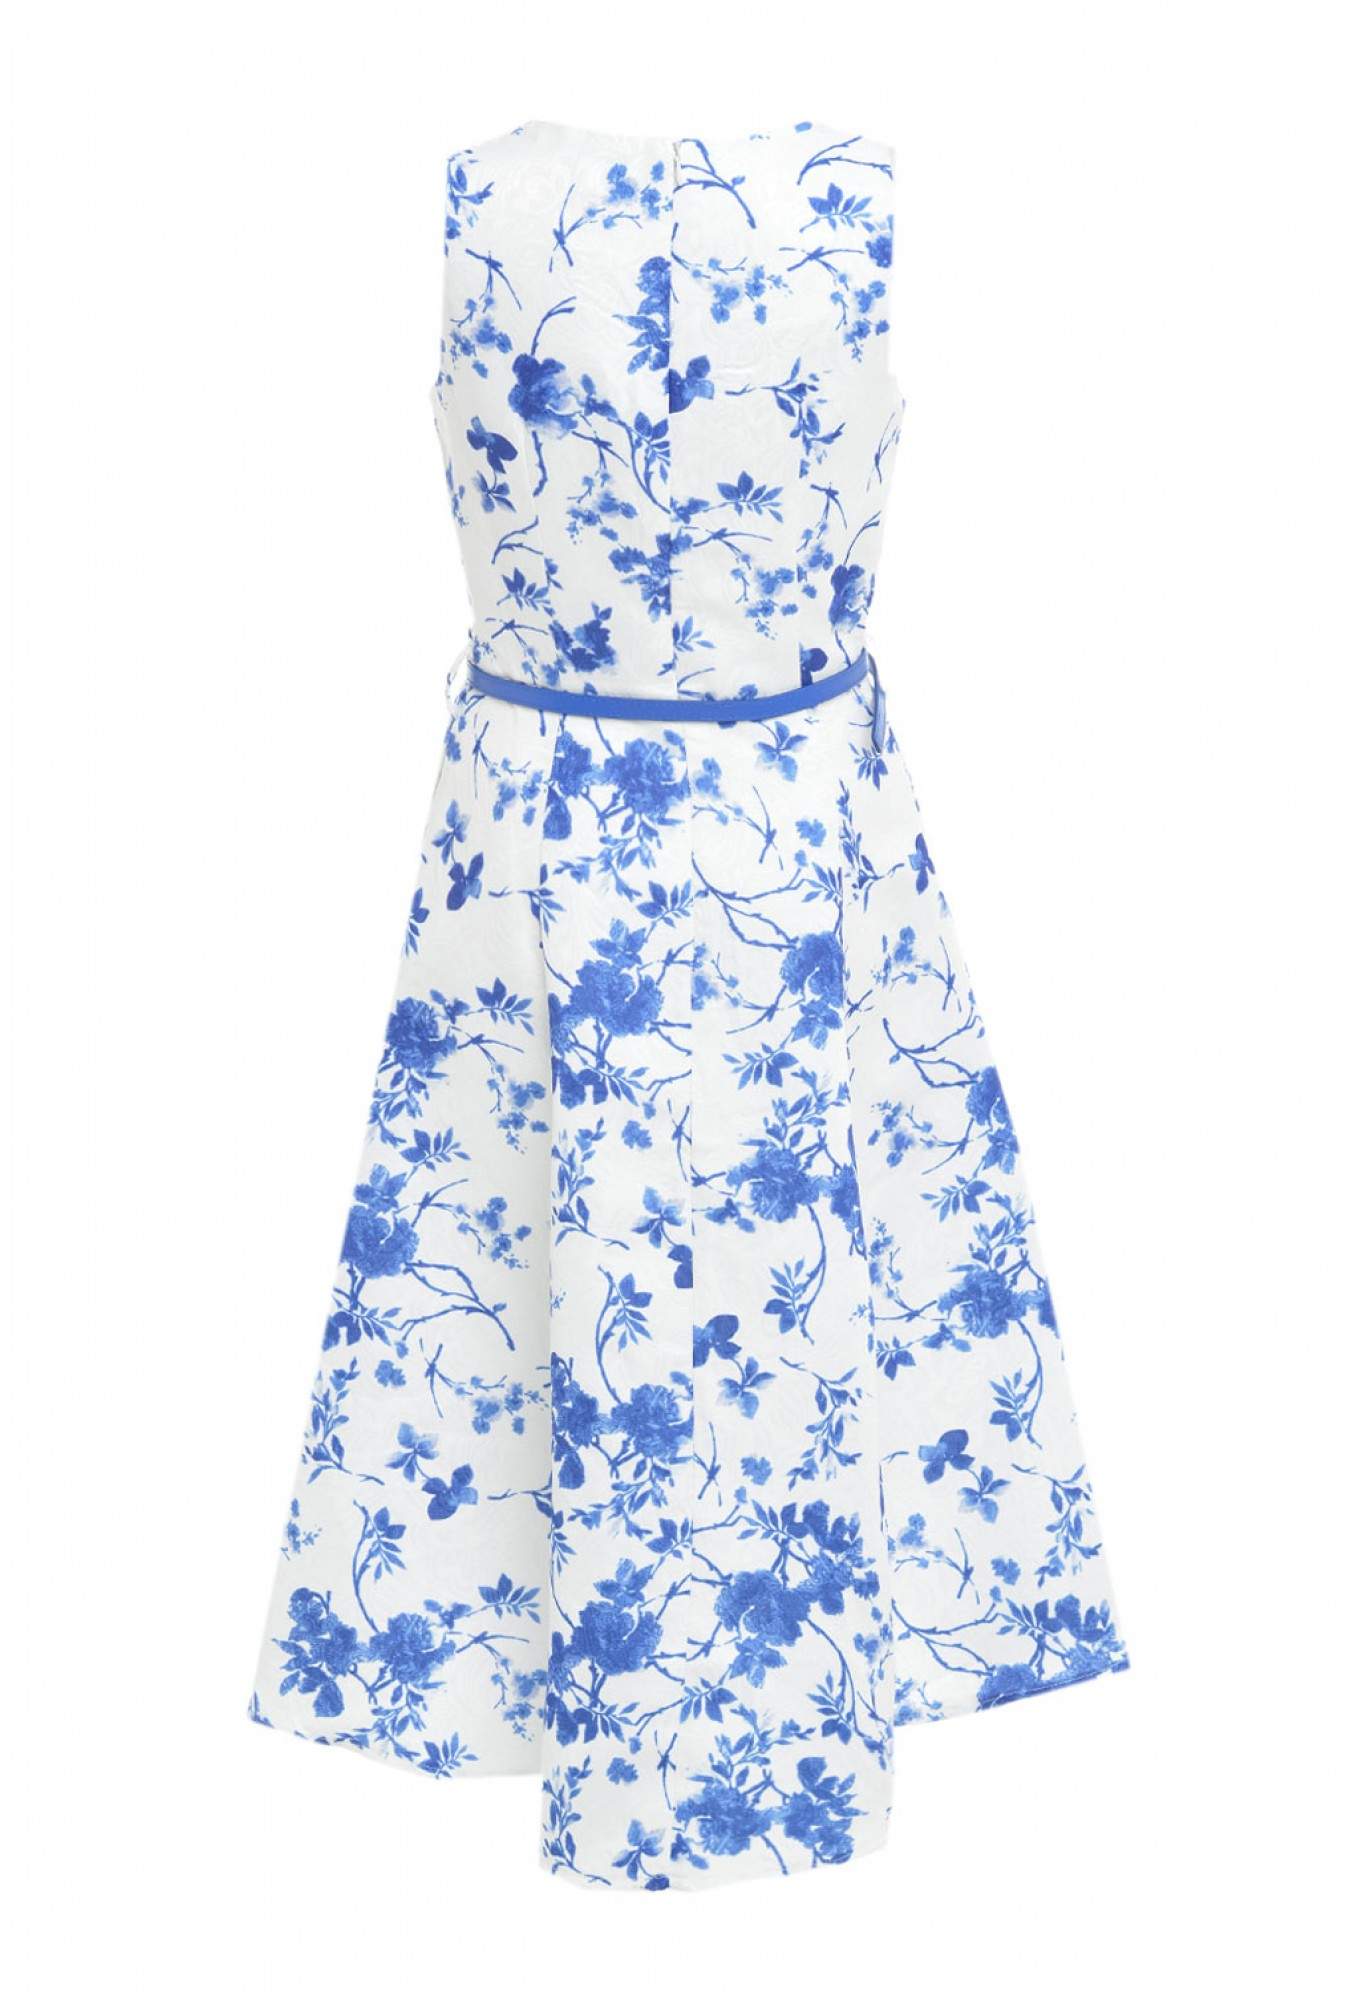 Marc Angelo Vicki Floral Dipped Hem Dress in White | iCLOTHING